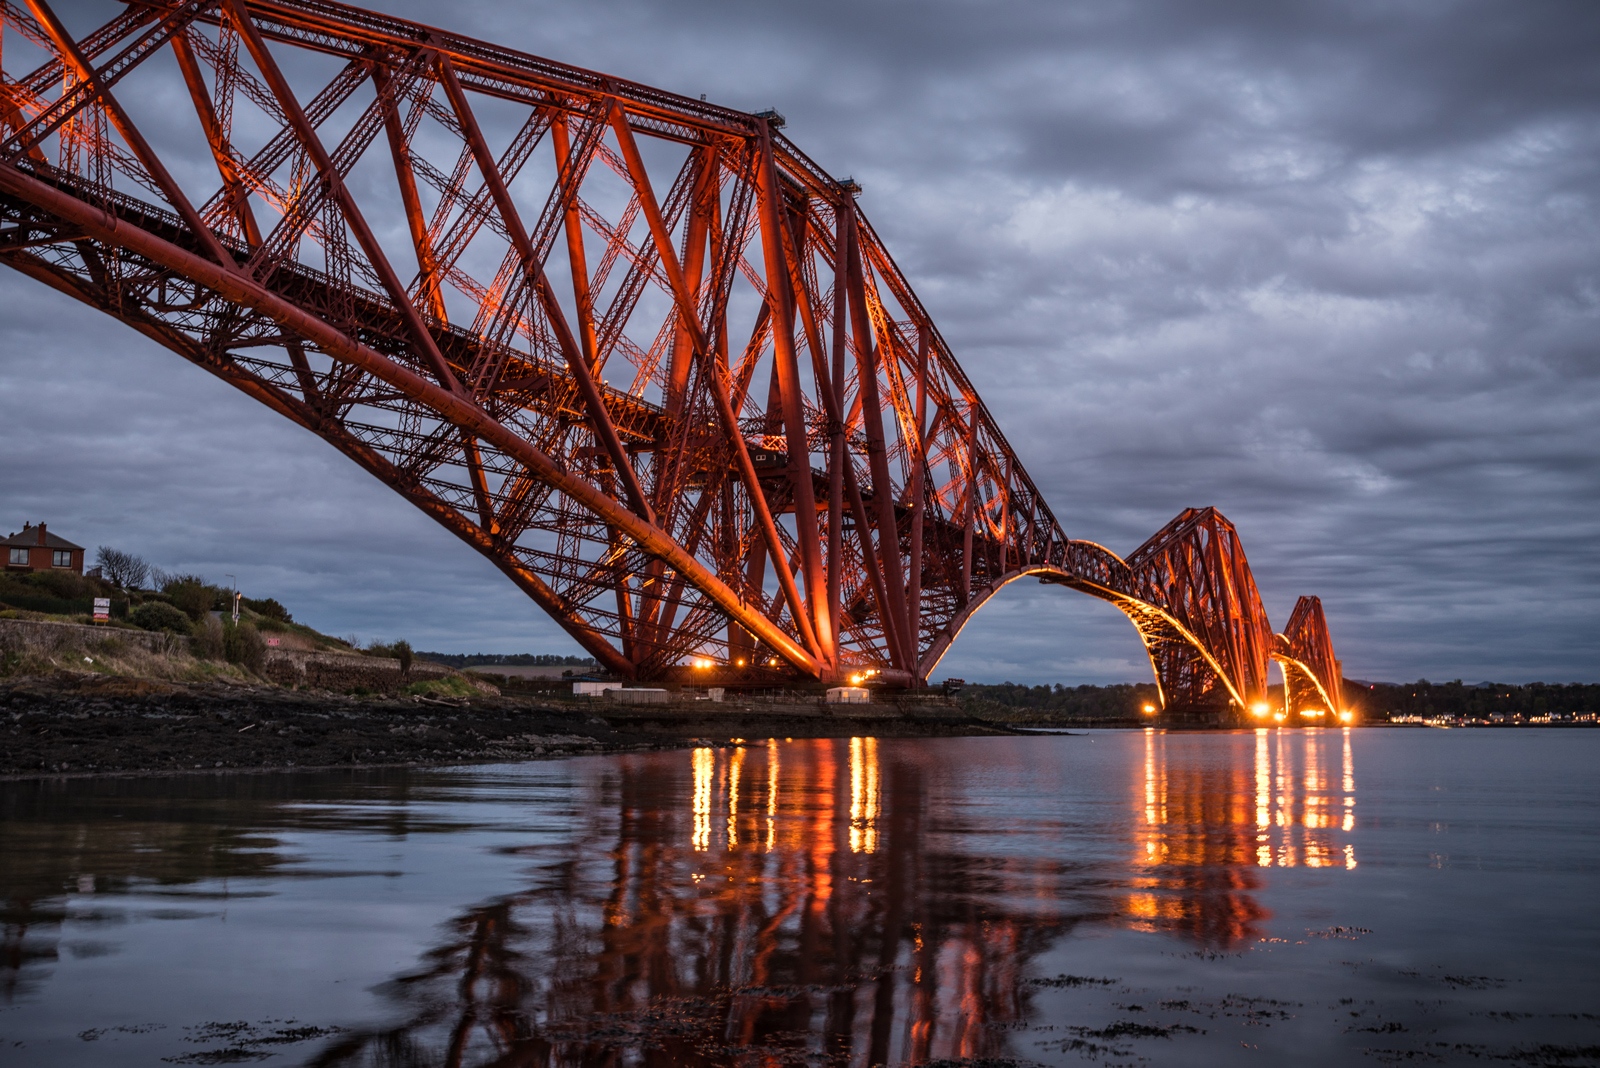 The Forth Rail Bridge photographed at night, from the water